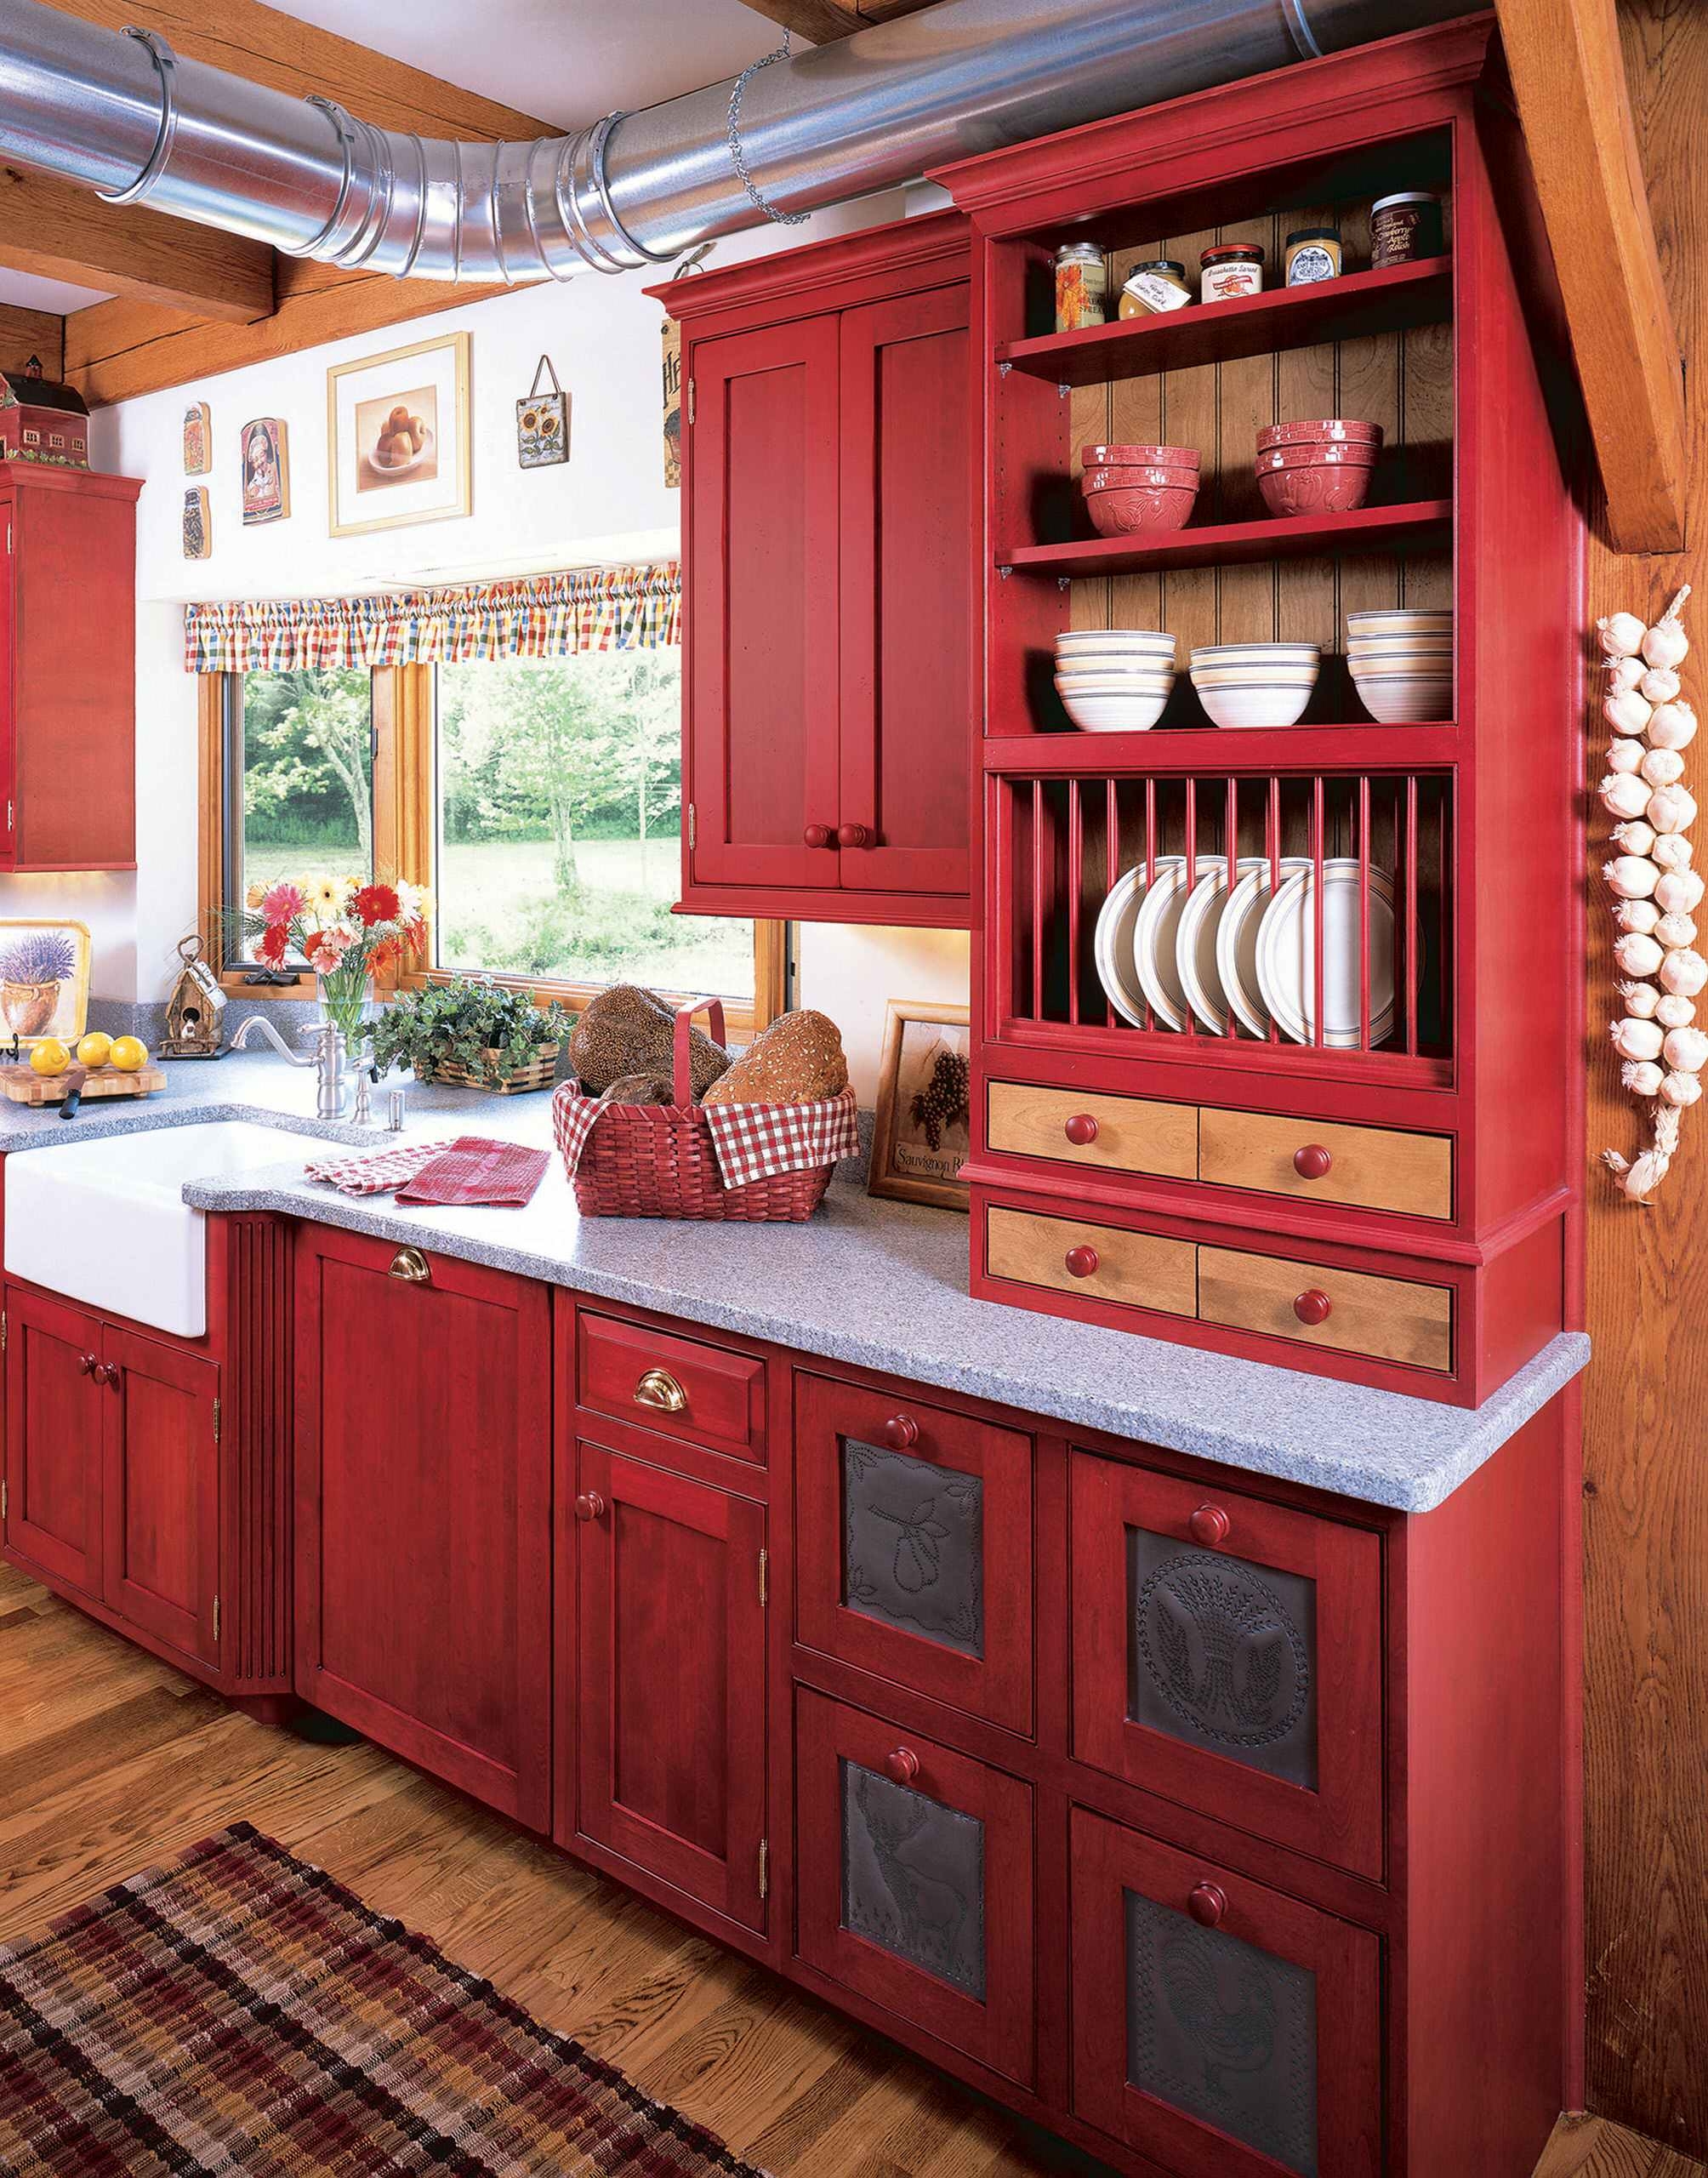 https://foter.com/photos/420/1-rustic-kitchen-with-bright-red-colors.jpg